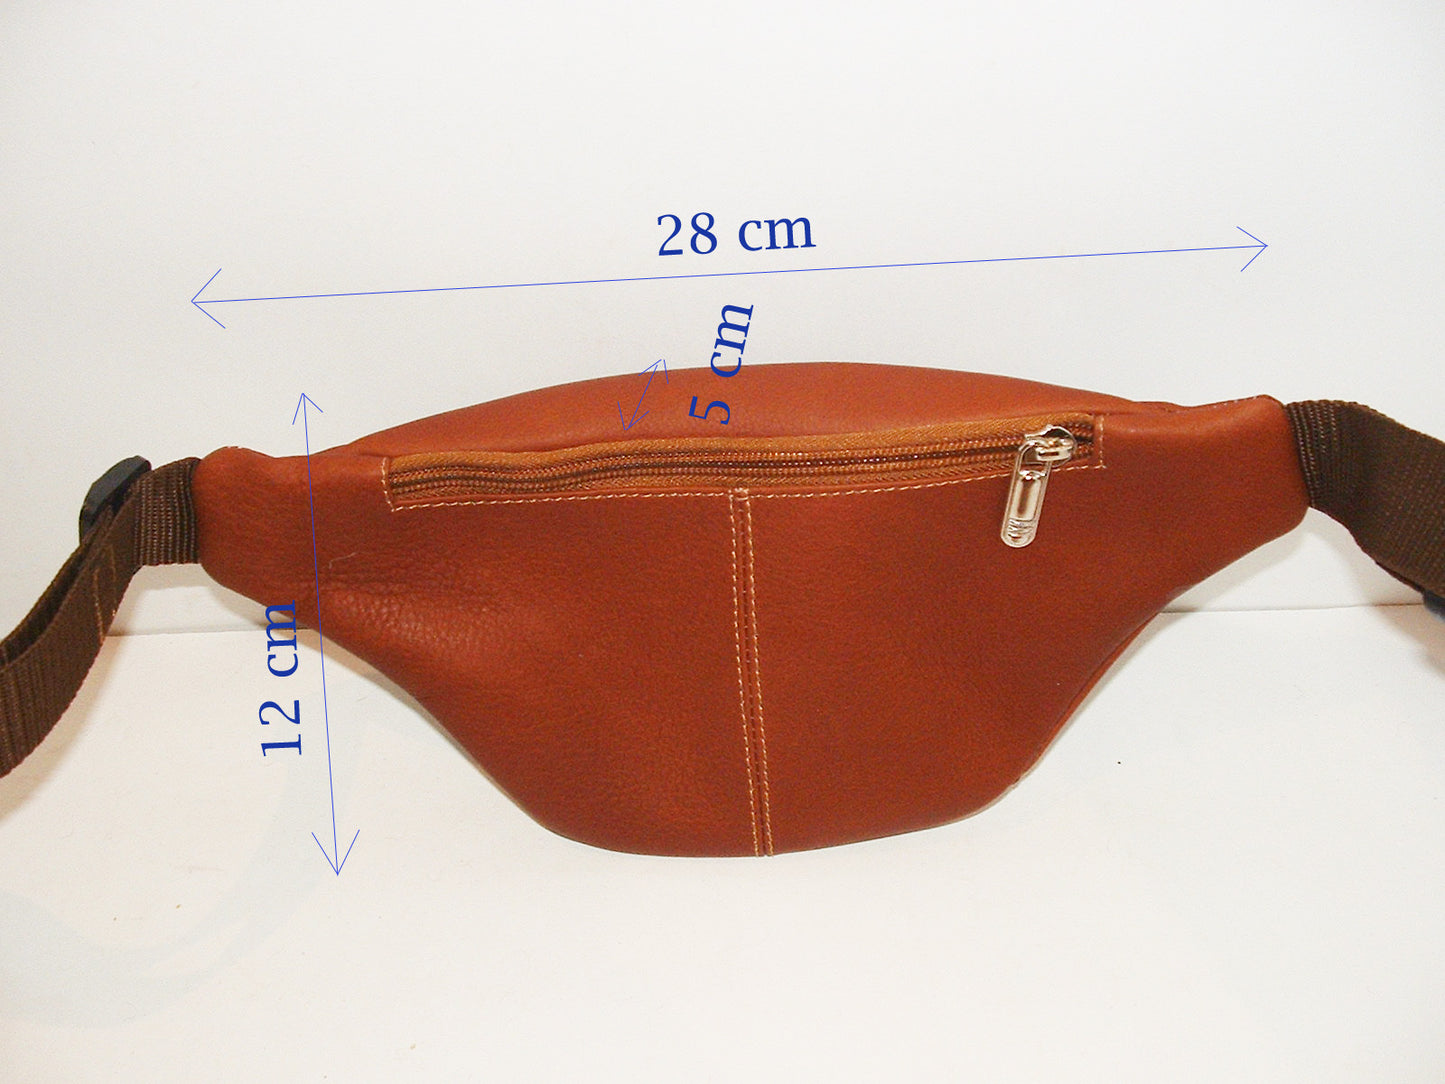 Genuine Leather Fanny Pack